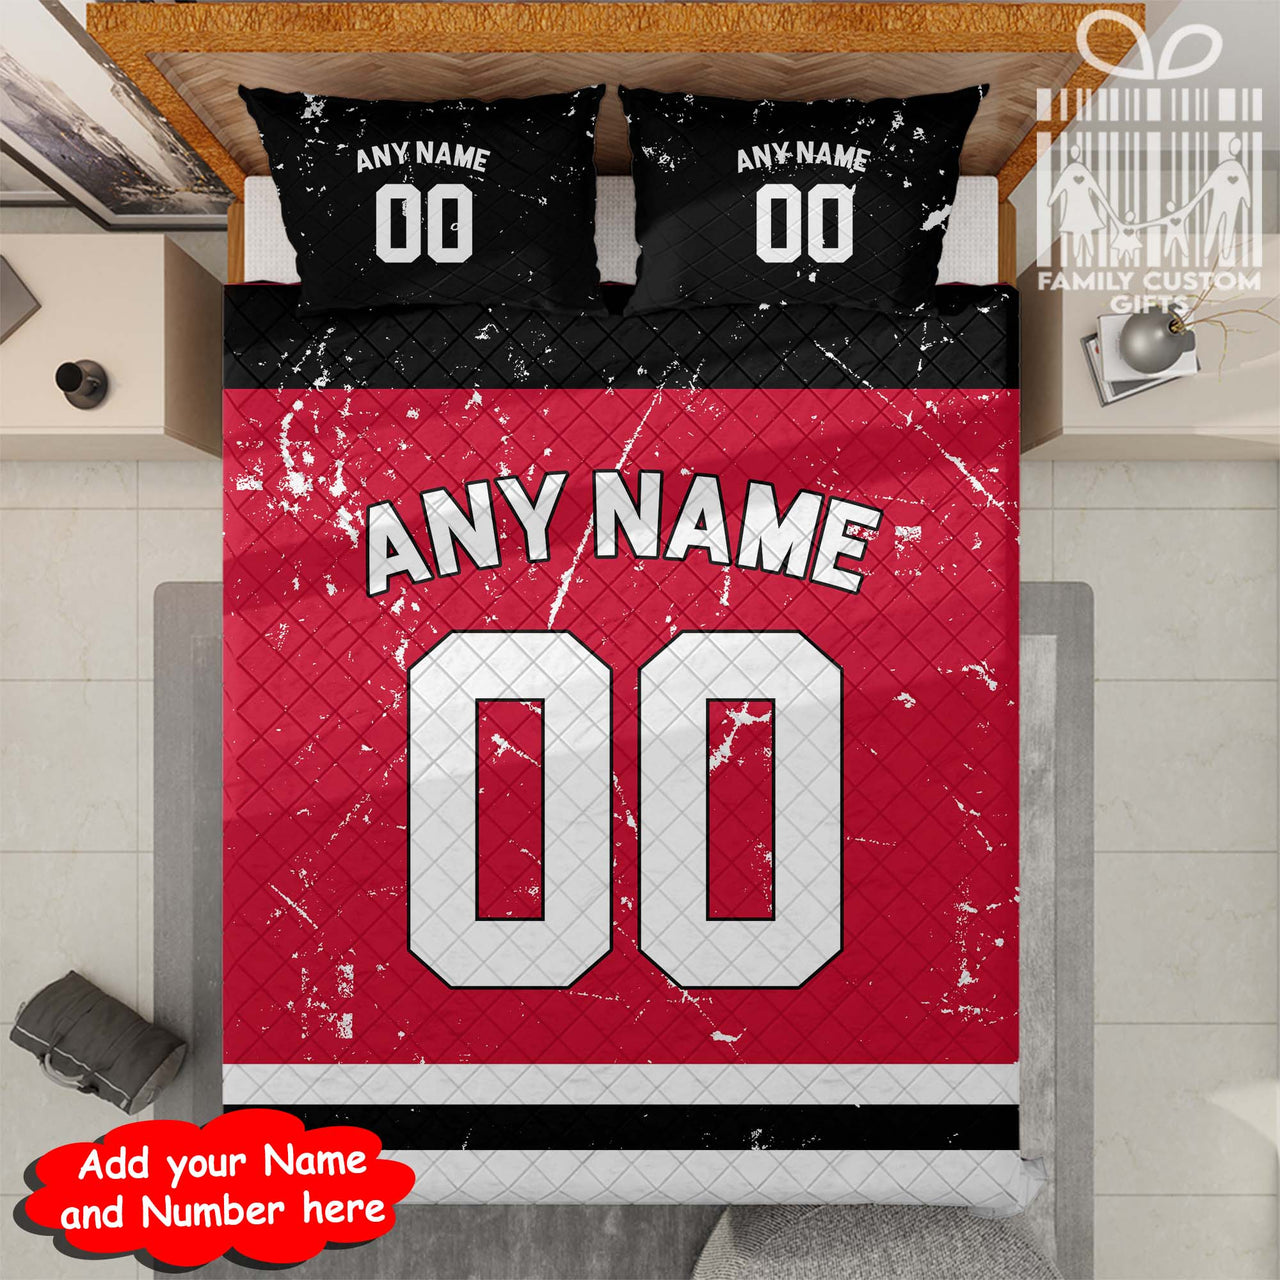 Custom Quilt Sets New Jersey Personalized Ice hockey Premium Quilt Bedding for Men Women